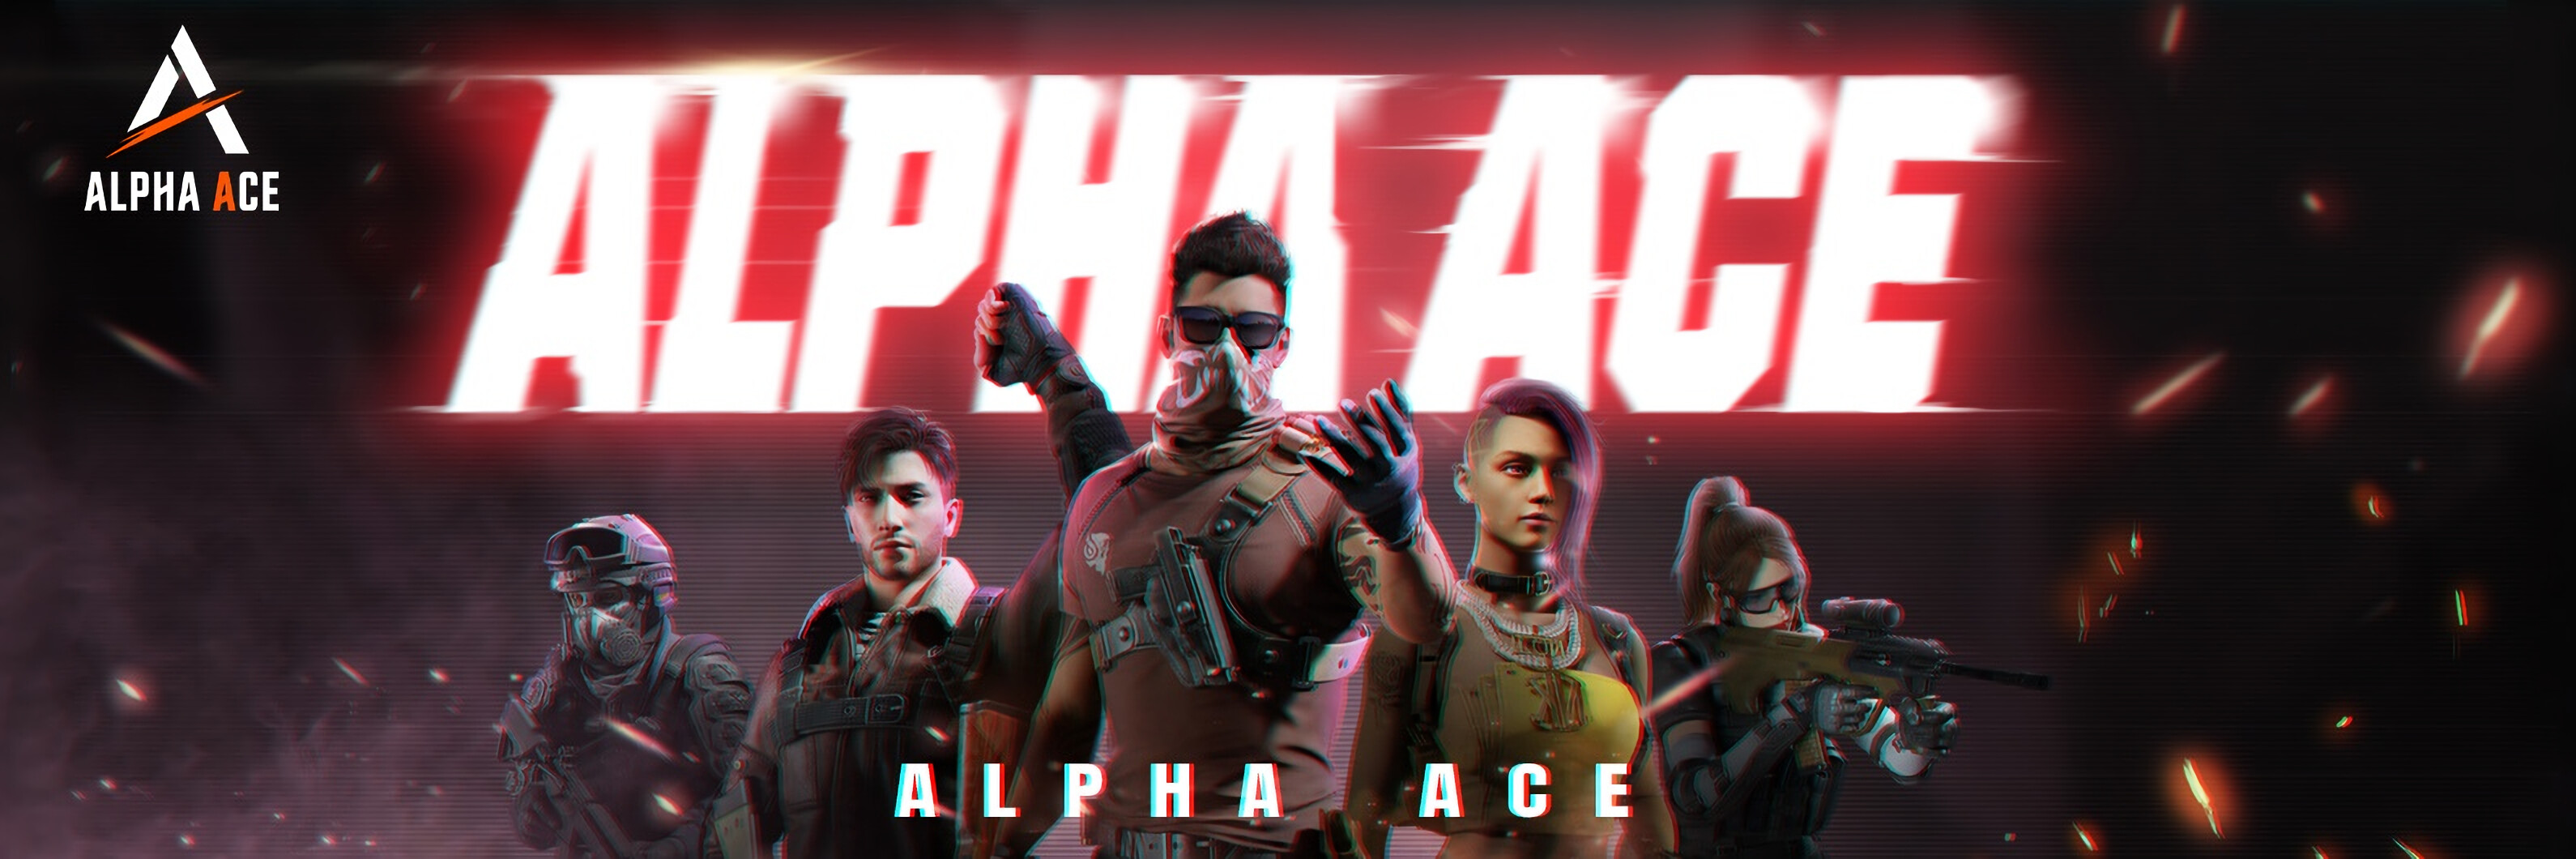 Alpha Ace (Game): Various competitive PvP game modes such as Team Clash, Demolition, and Point Grab. 3180x1060 Dual Screen Wallpaper.